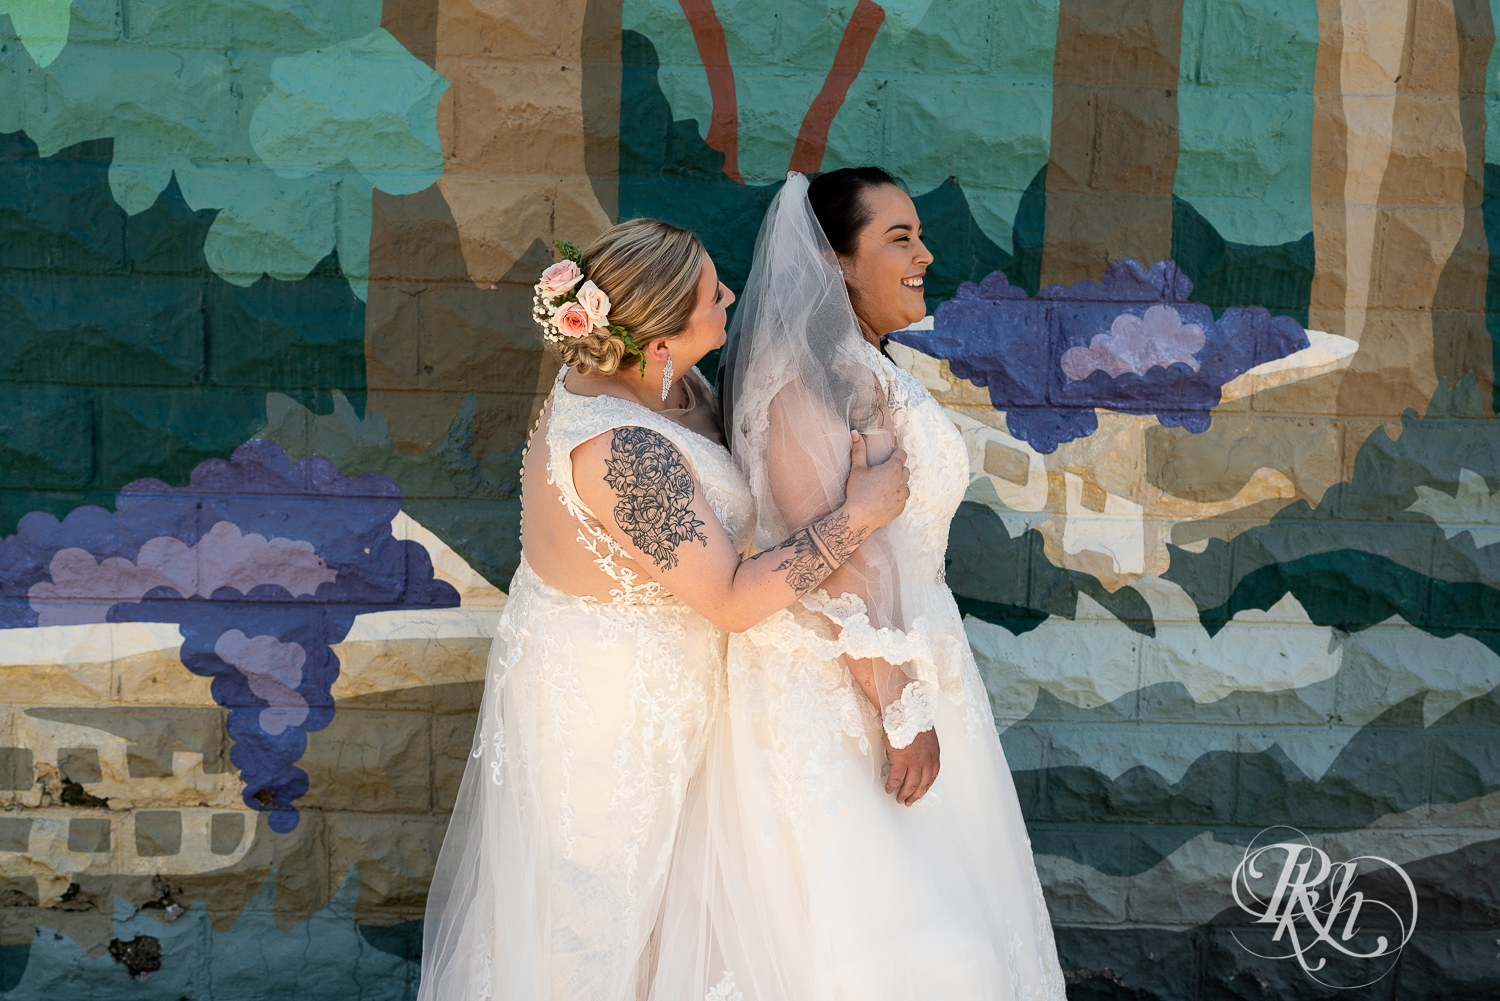 Lesbian brides share first look at Cannon River Winery in Cannon Falls, Minnesota.